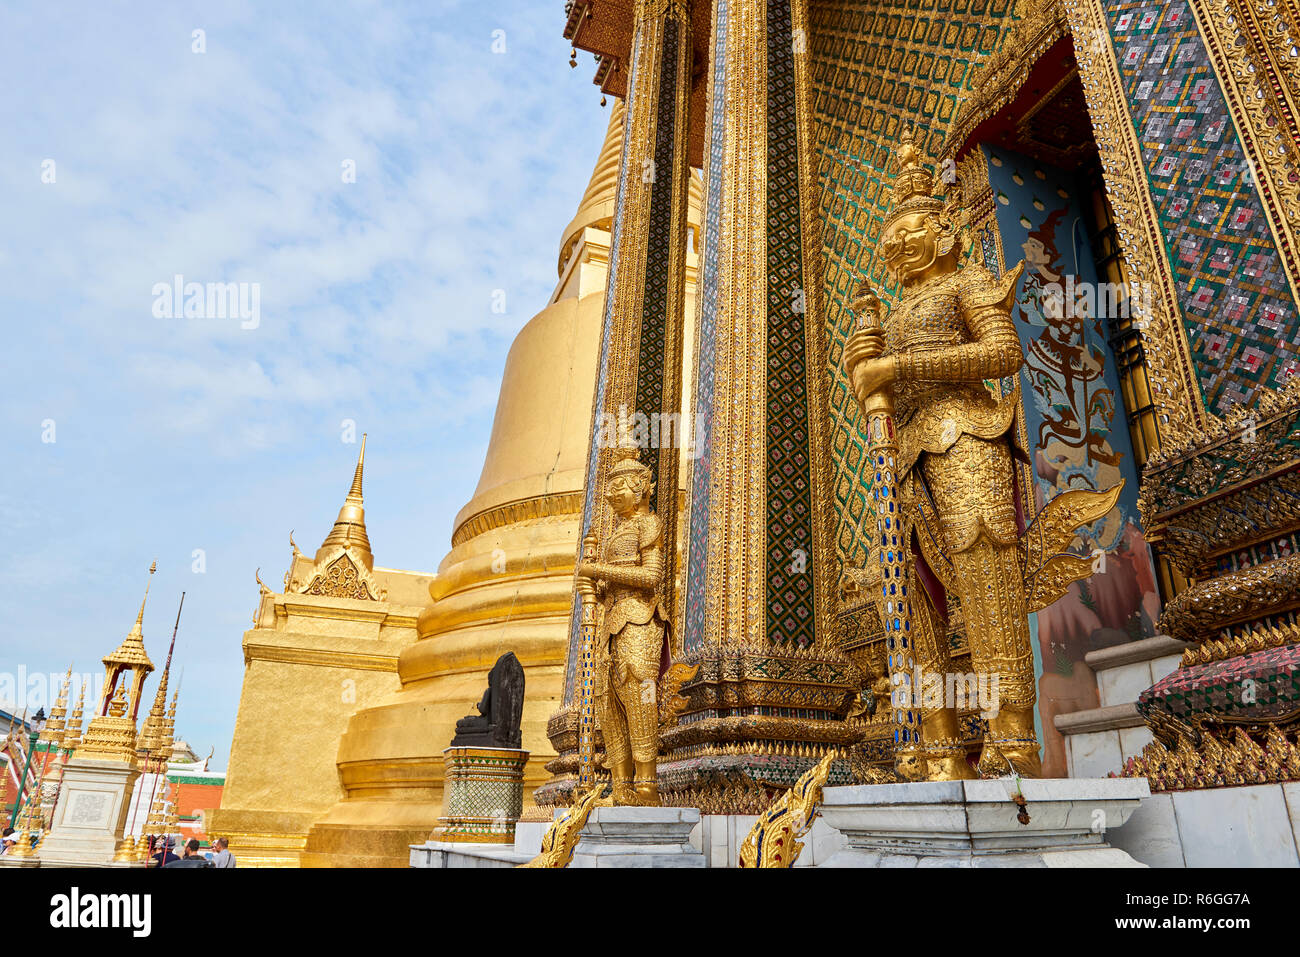 Golden Yaksha statue in the Grand Palace in Bangkok, Thailand. The demon-gods statues are a common sight in Buddhist temples in Thailand, but also fea Stock Photo